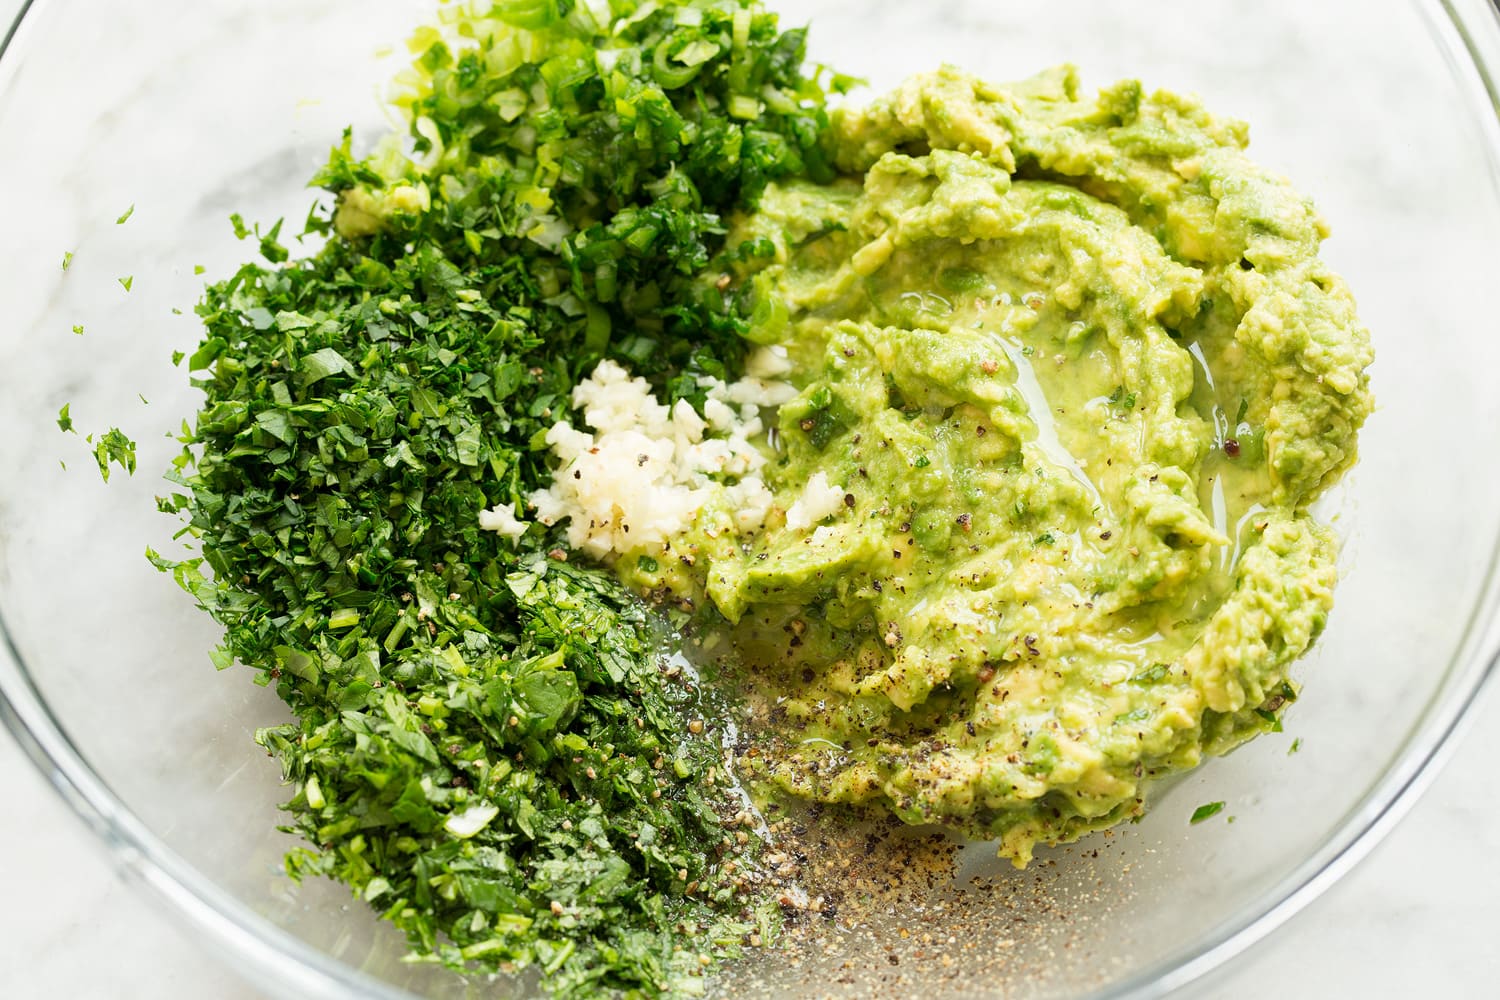 Mashed avocado, herb and lime mixture.